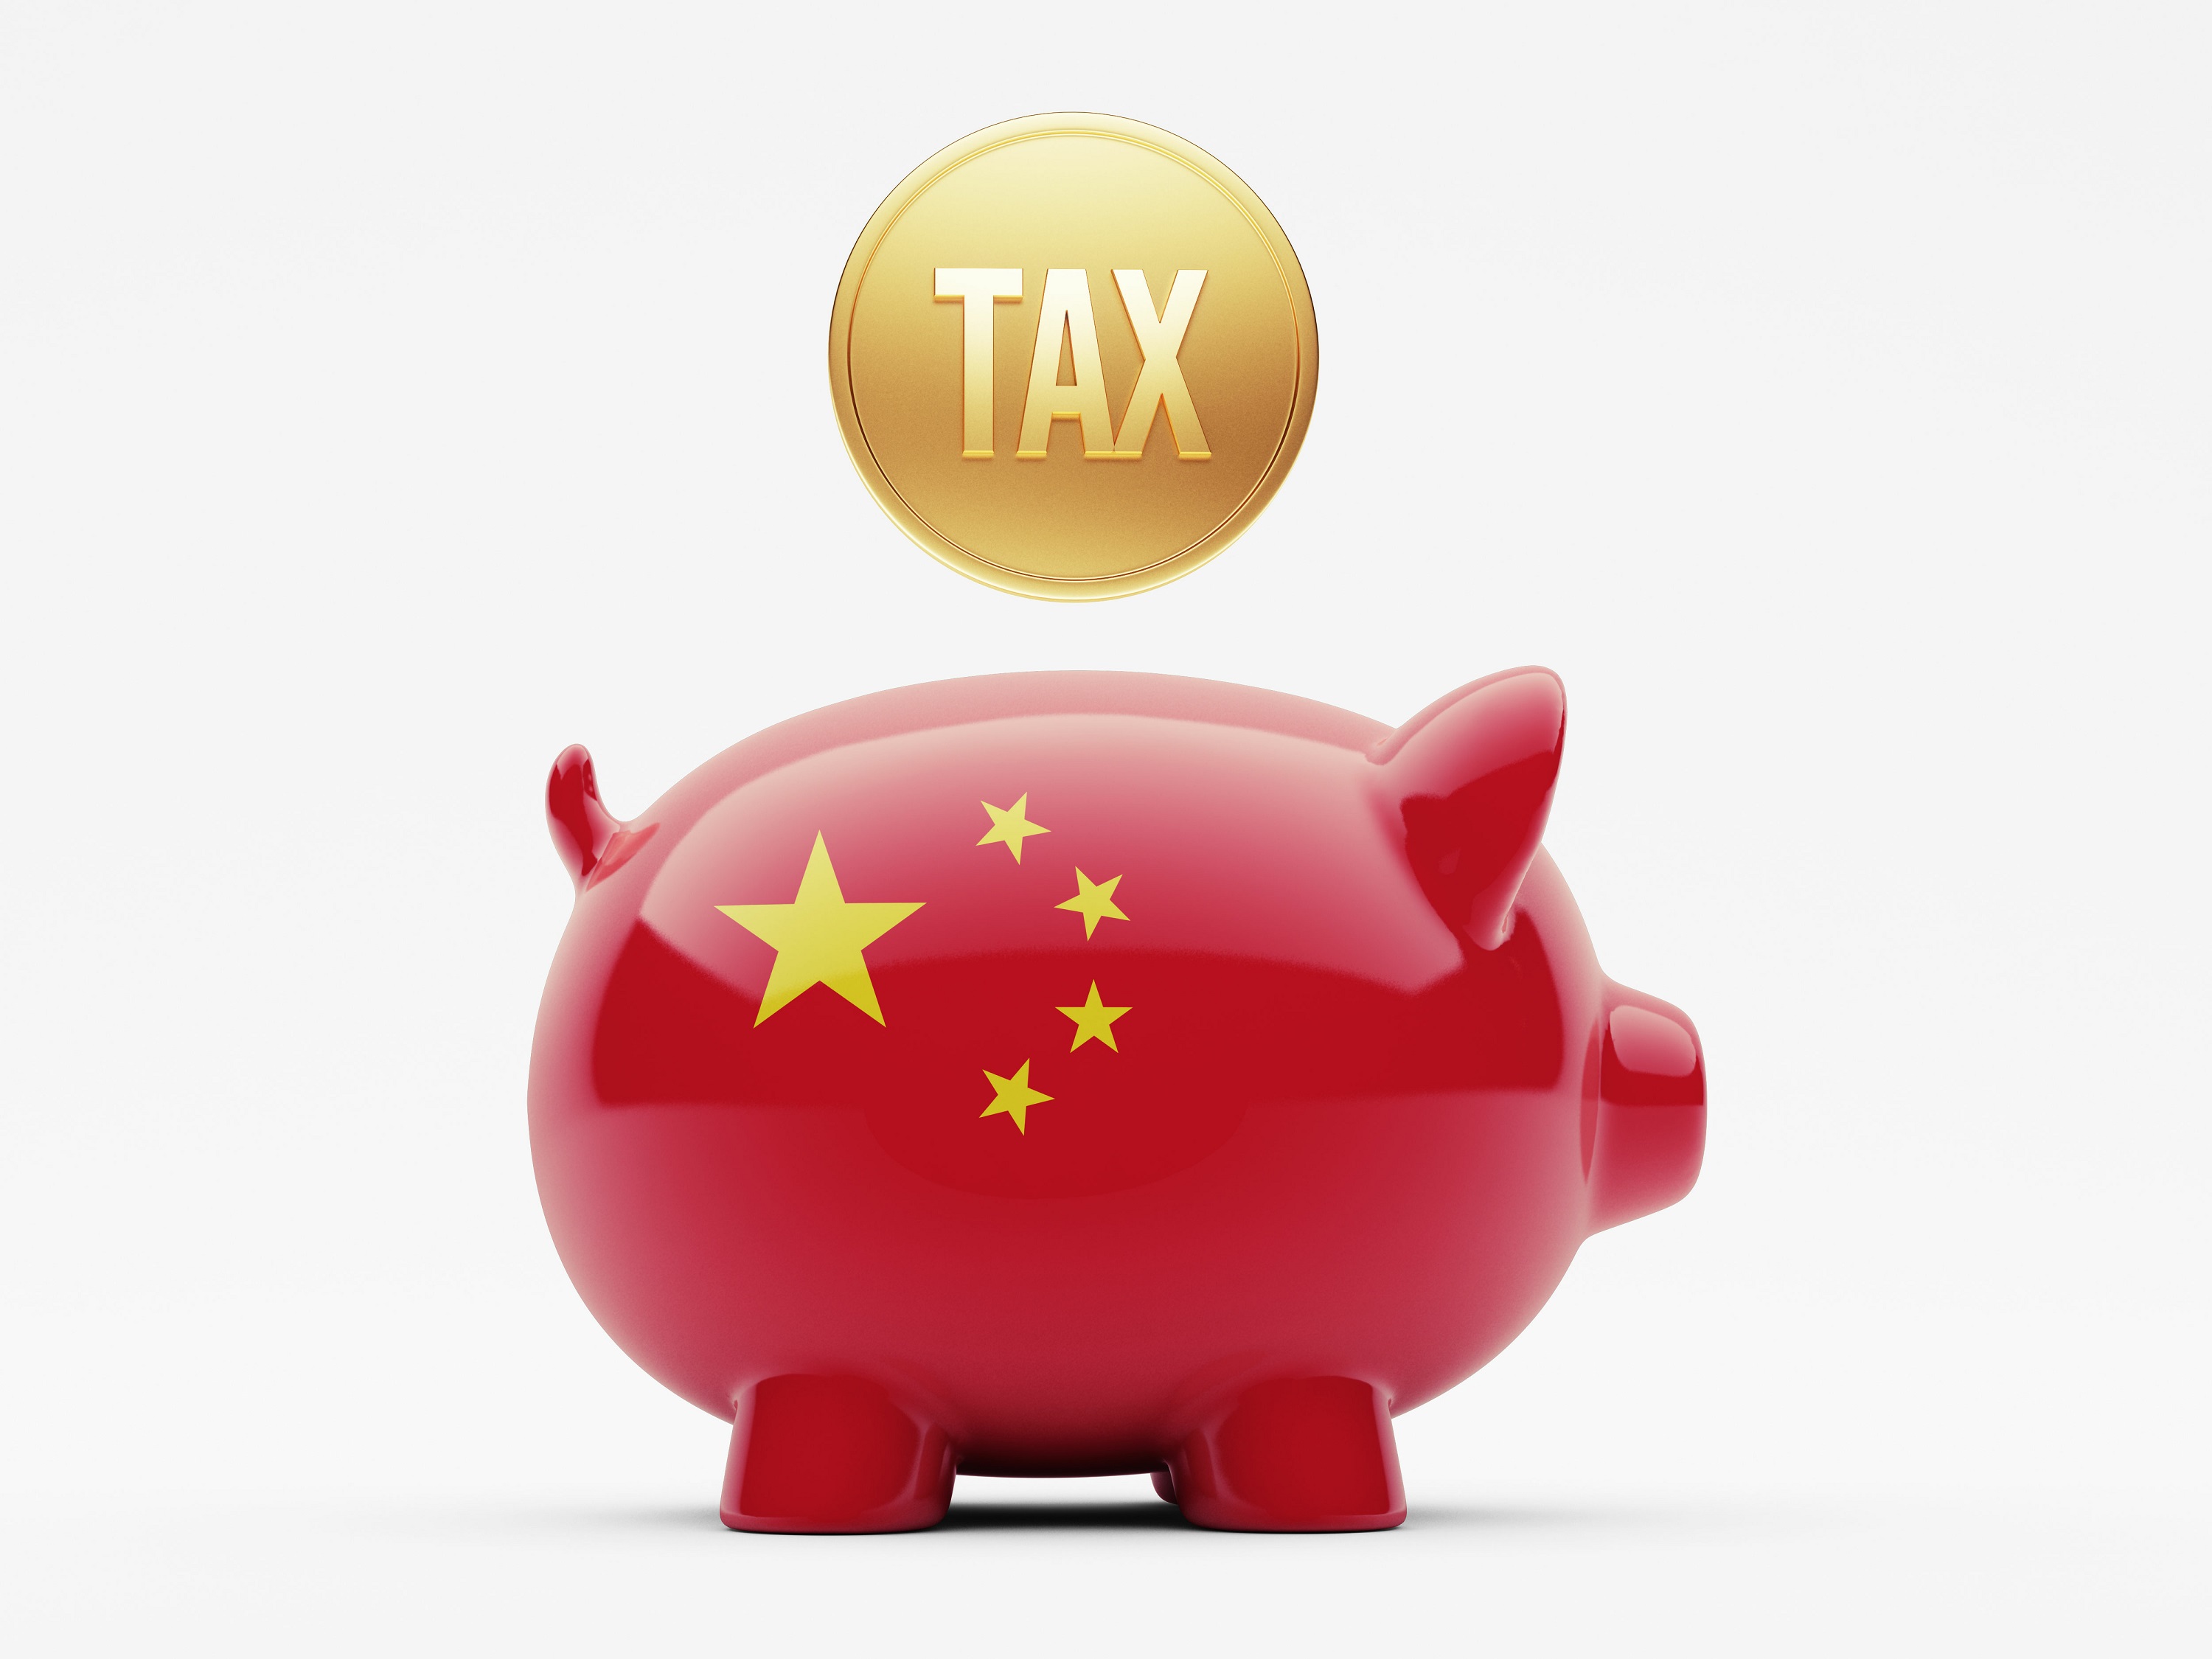 A golden coin with the word &amp;ldquo;tax&amp;rdquo; on it hangs above a piggy bank decorated in the colors of the Chinese flag.